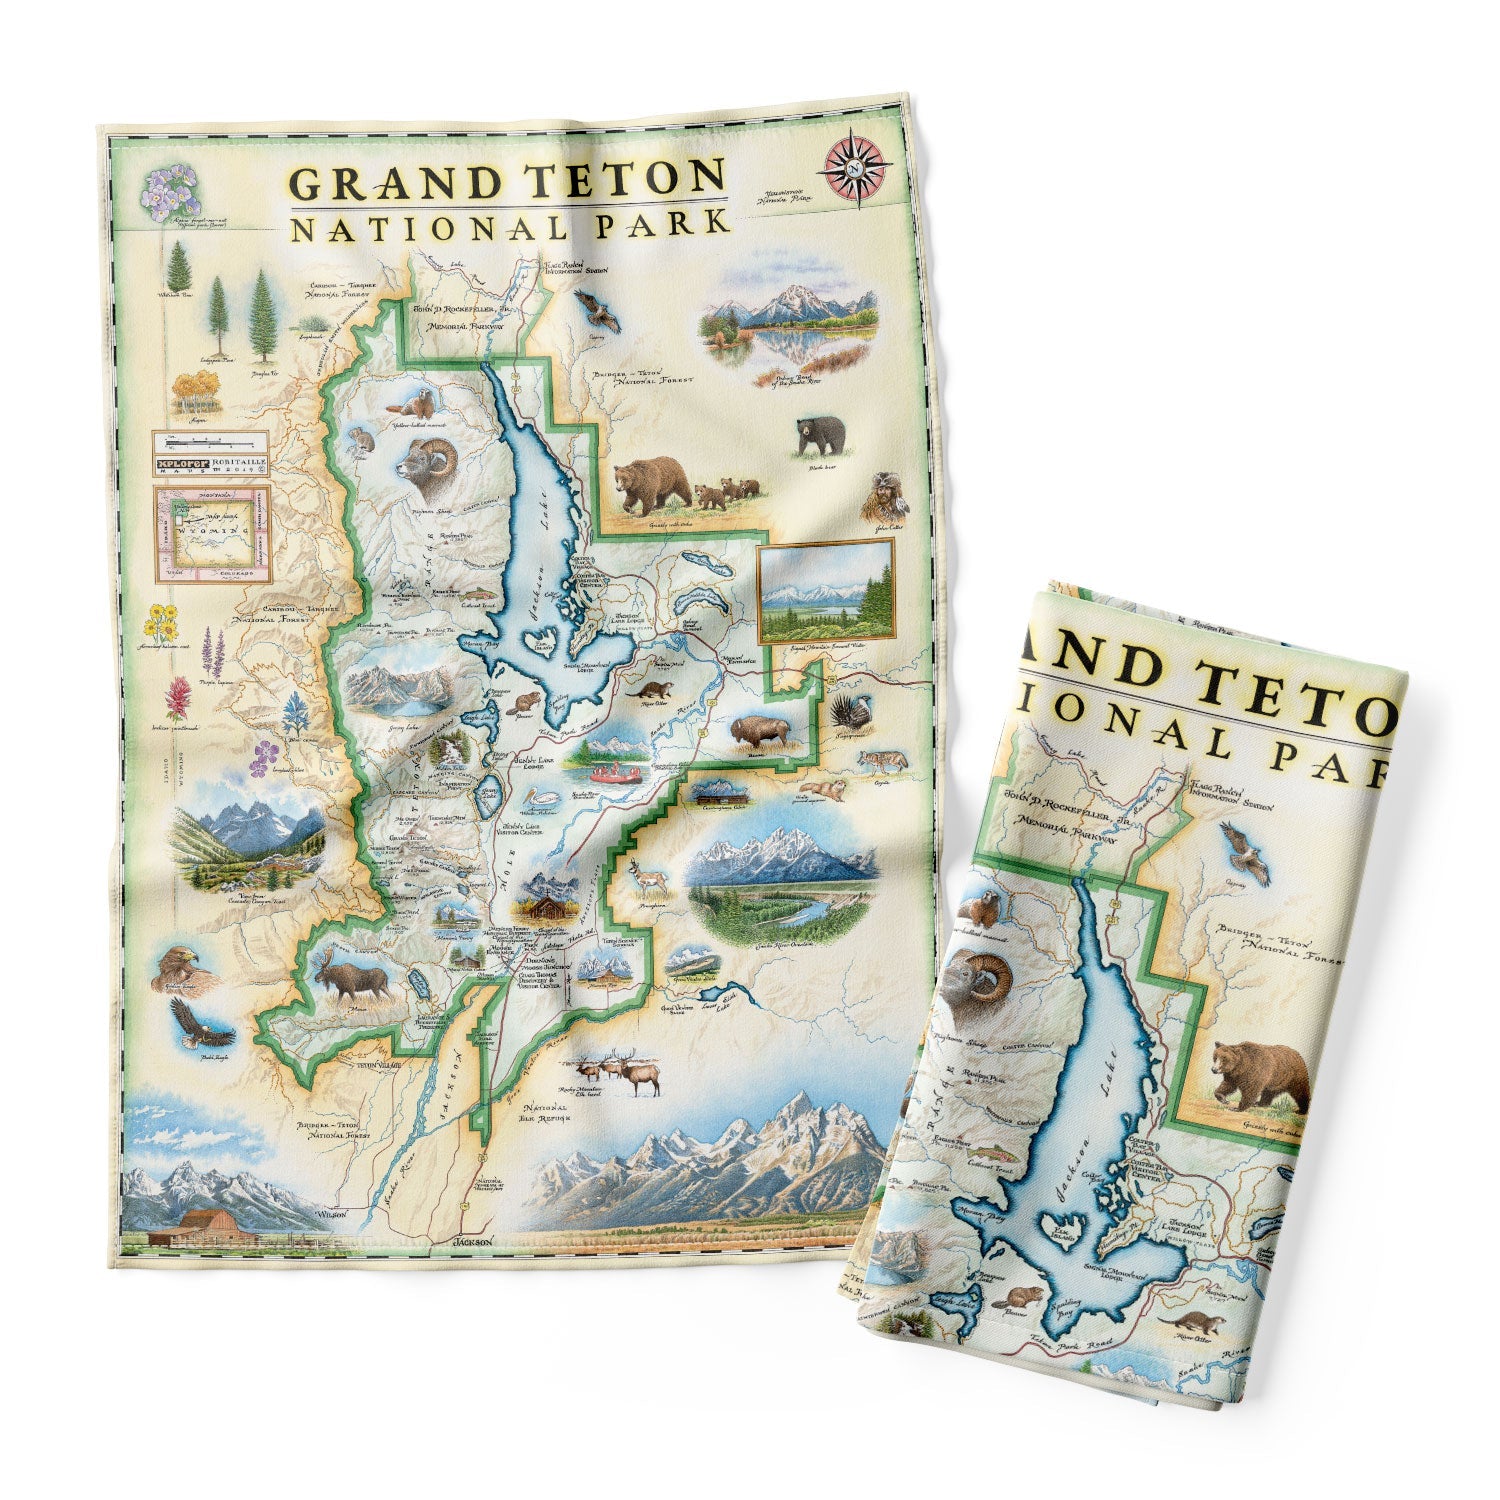 Grand Teton National Park Map Kitchen Dishwashing Towel in the colors of blues, greens, and beiges. This Map features birds, eagles, Osprey, Bears, forest, water, deer, mountain lion, fish, and flowers.